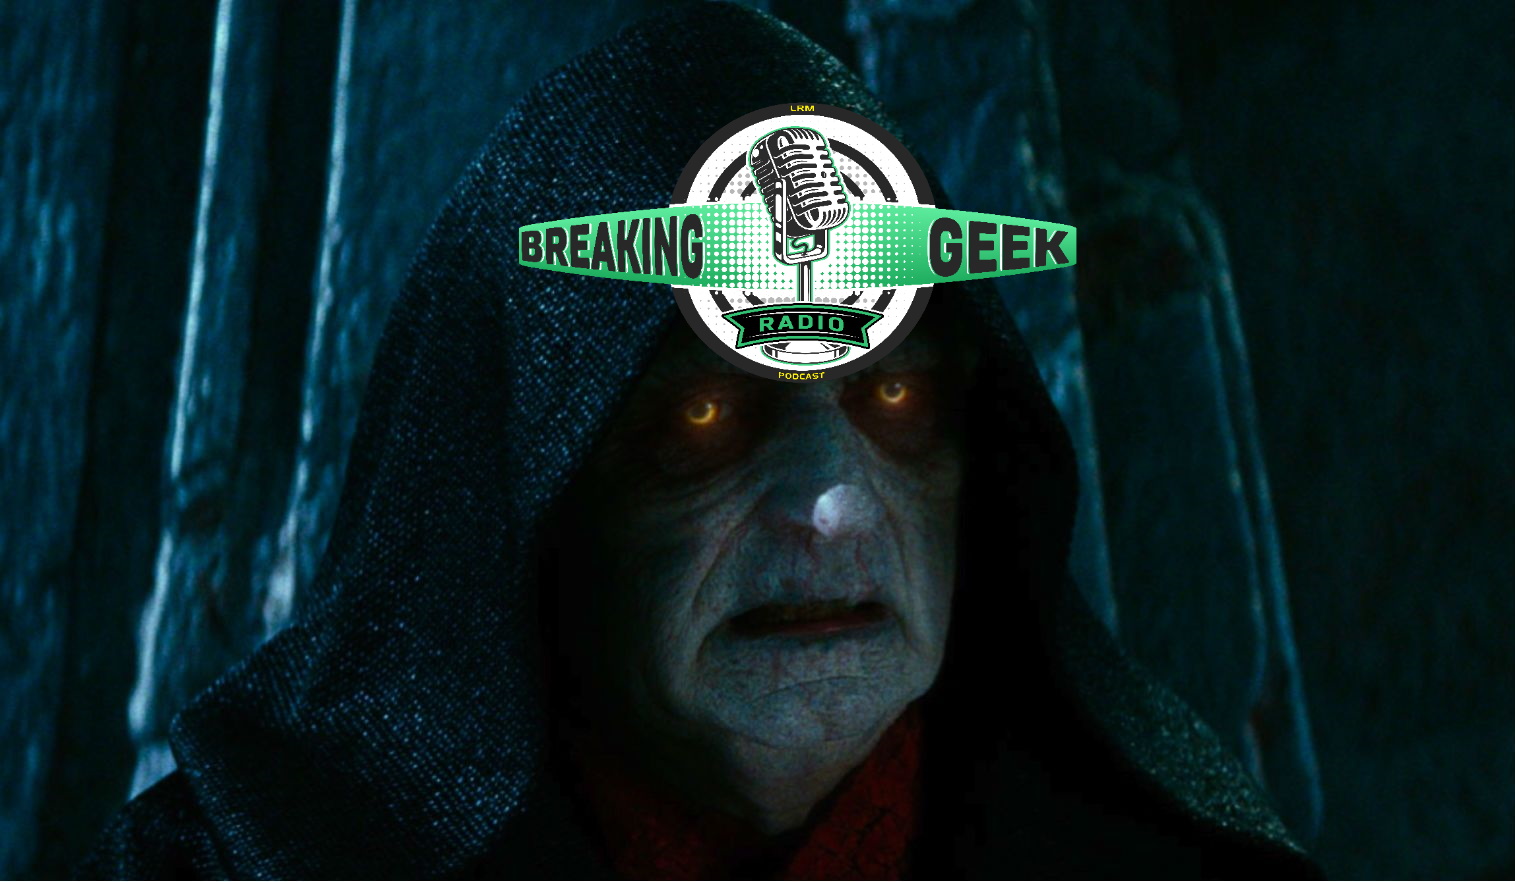 May The 4th Be With You! Rise Of Skywalker Discussion: SPECIAL EDITION | Breaking Geek Radio: The Podcast